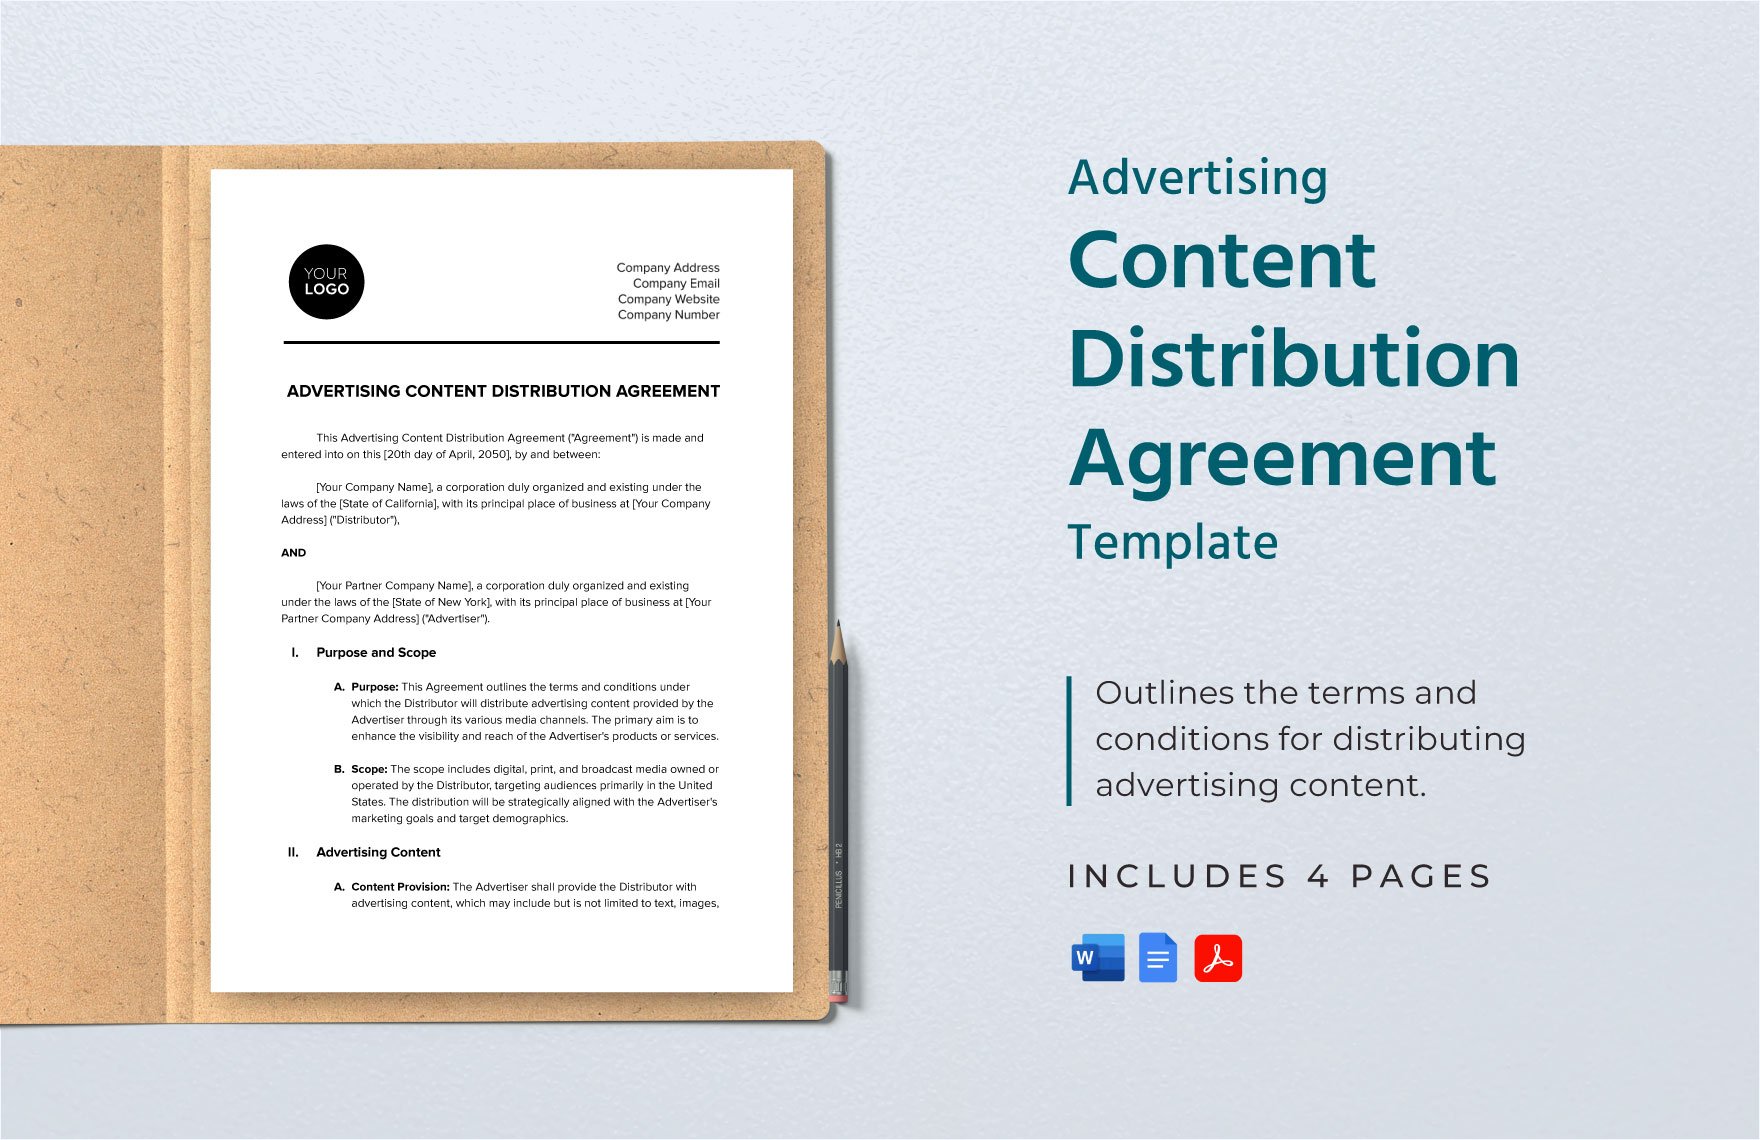 Advertising Content Distribution Agreement Template in Word, Google Docs, PDF